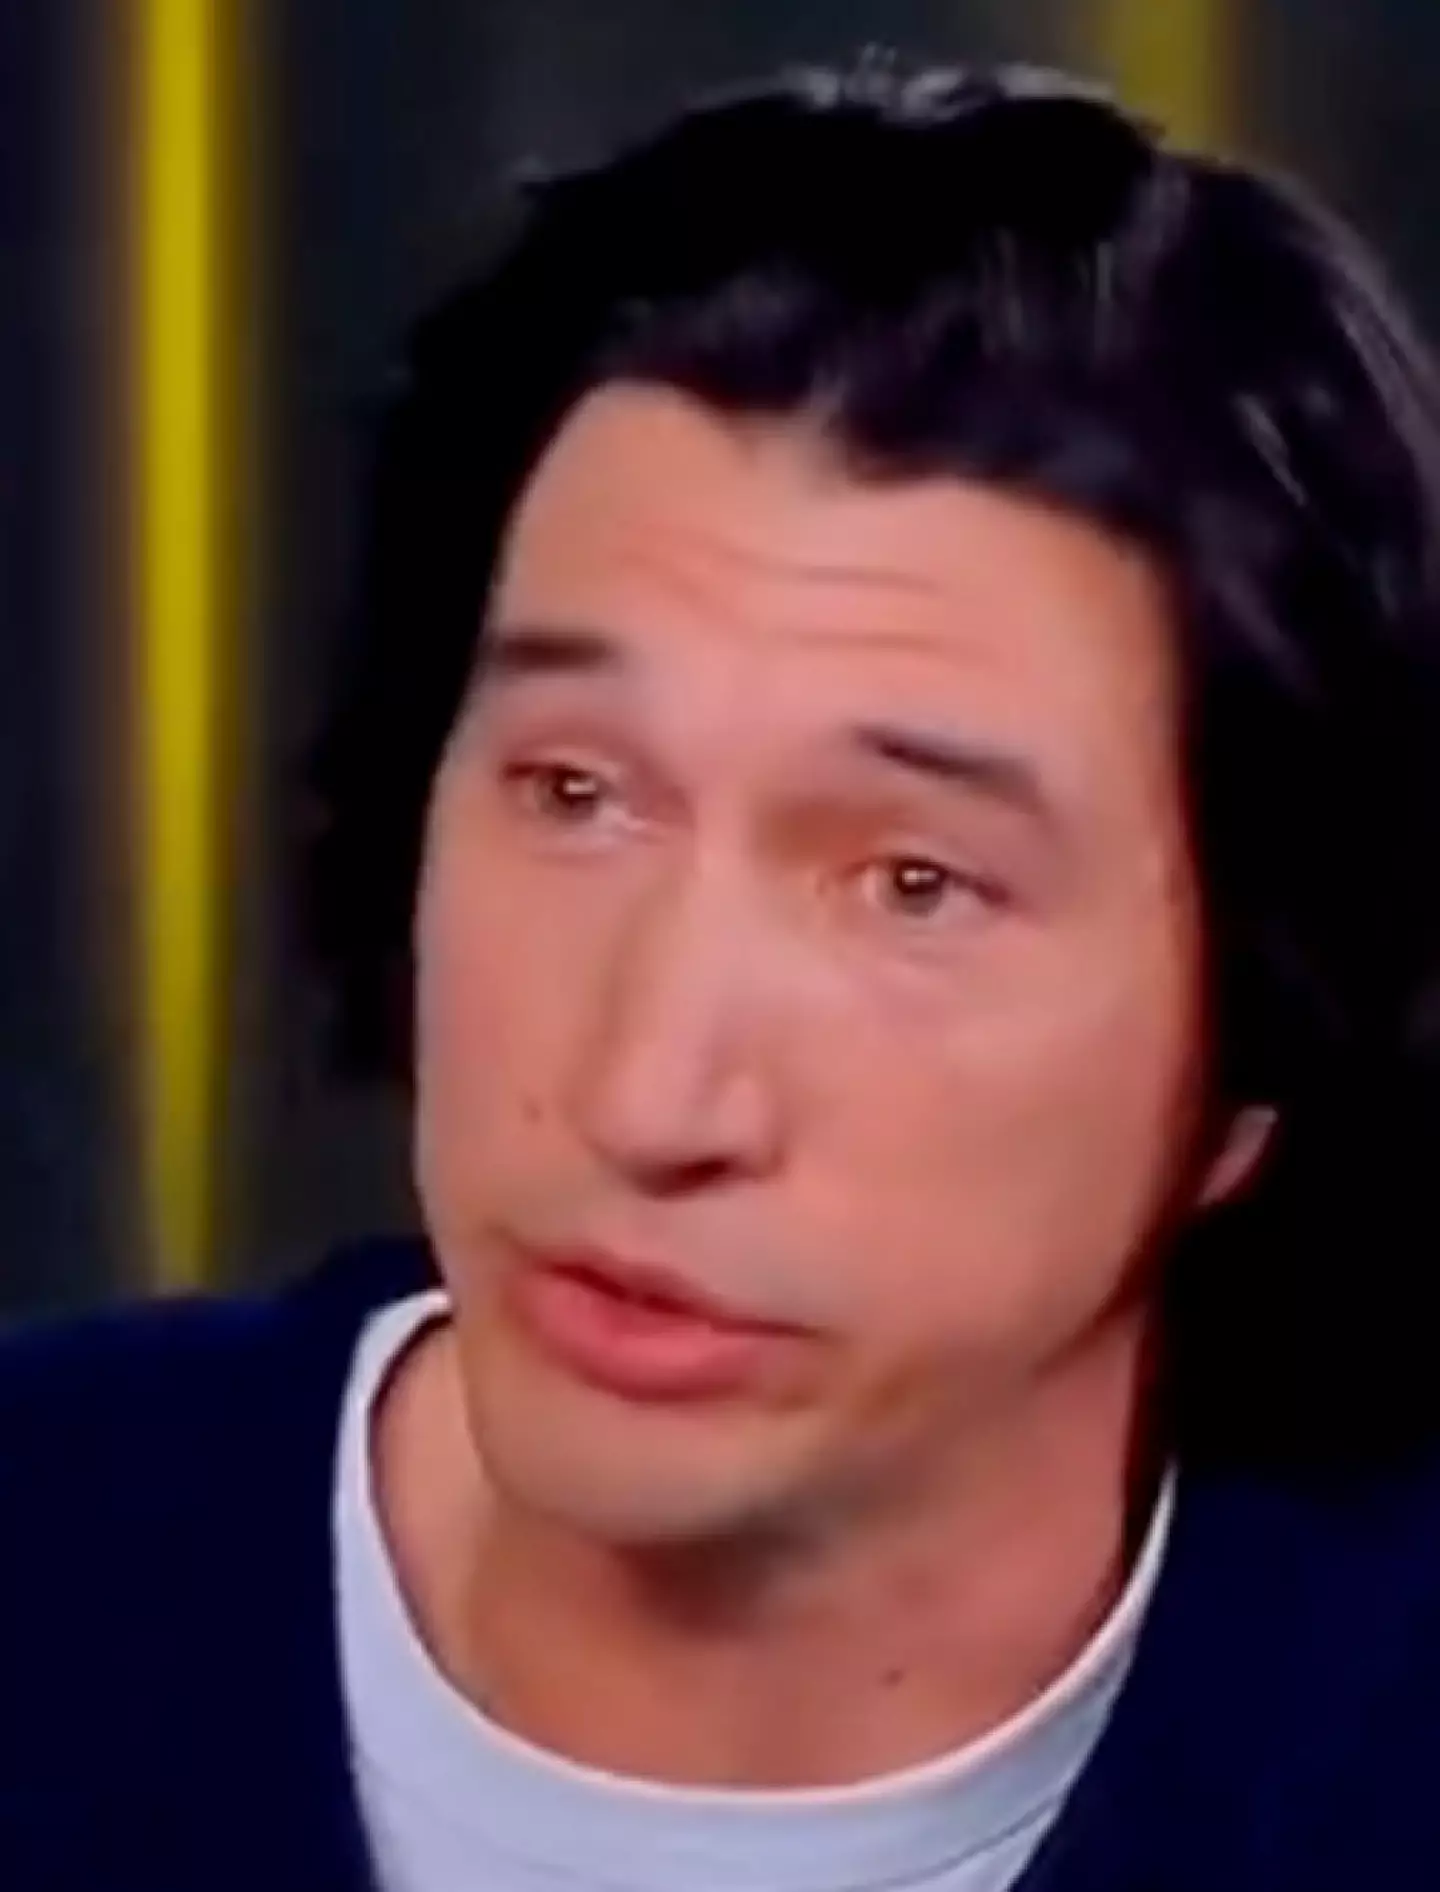 Adam Driver has been doing the media rounds promoting his latest film Ferrari.